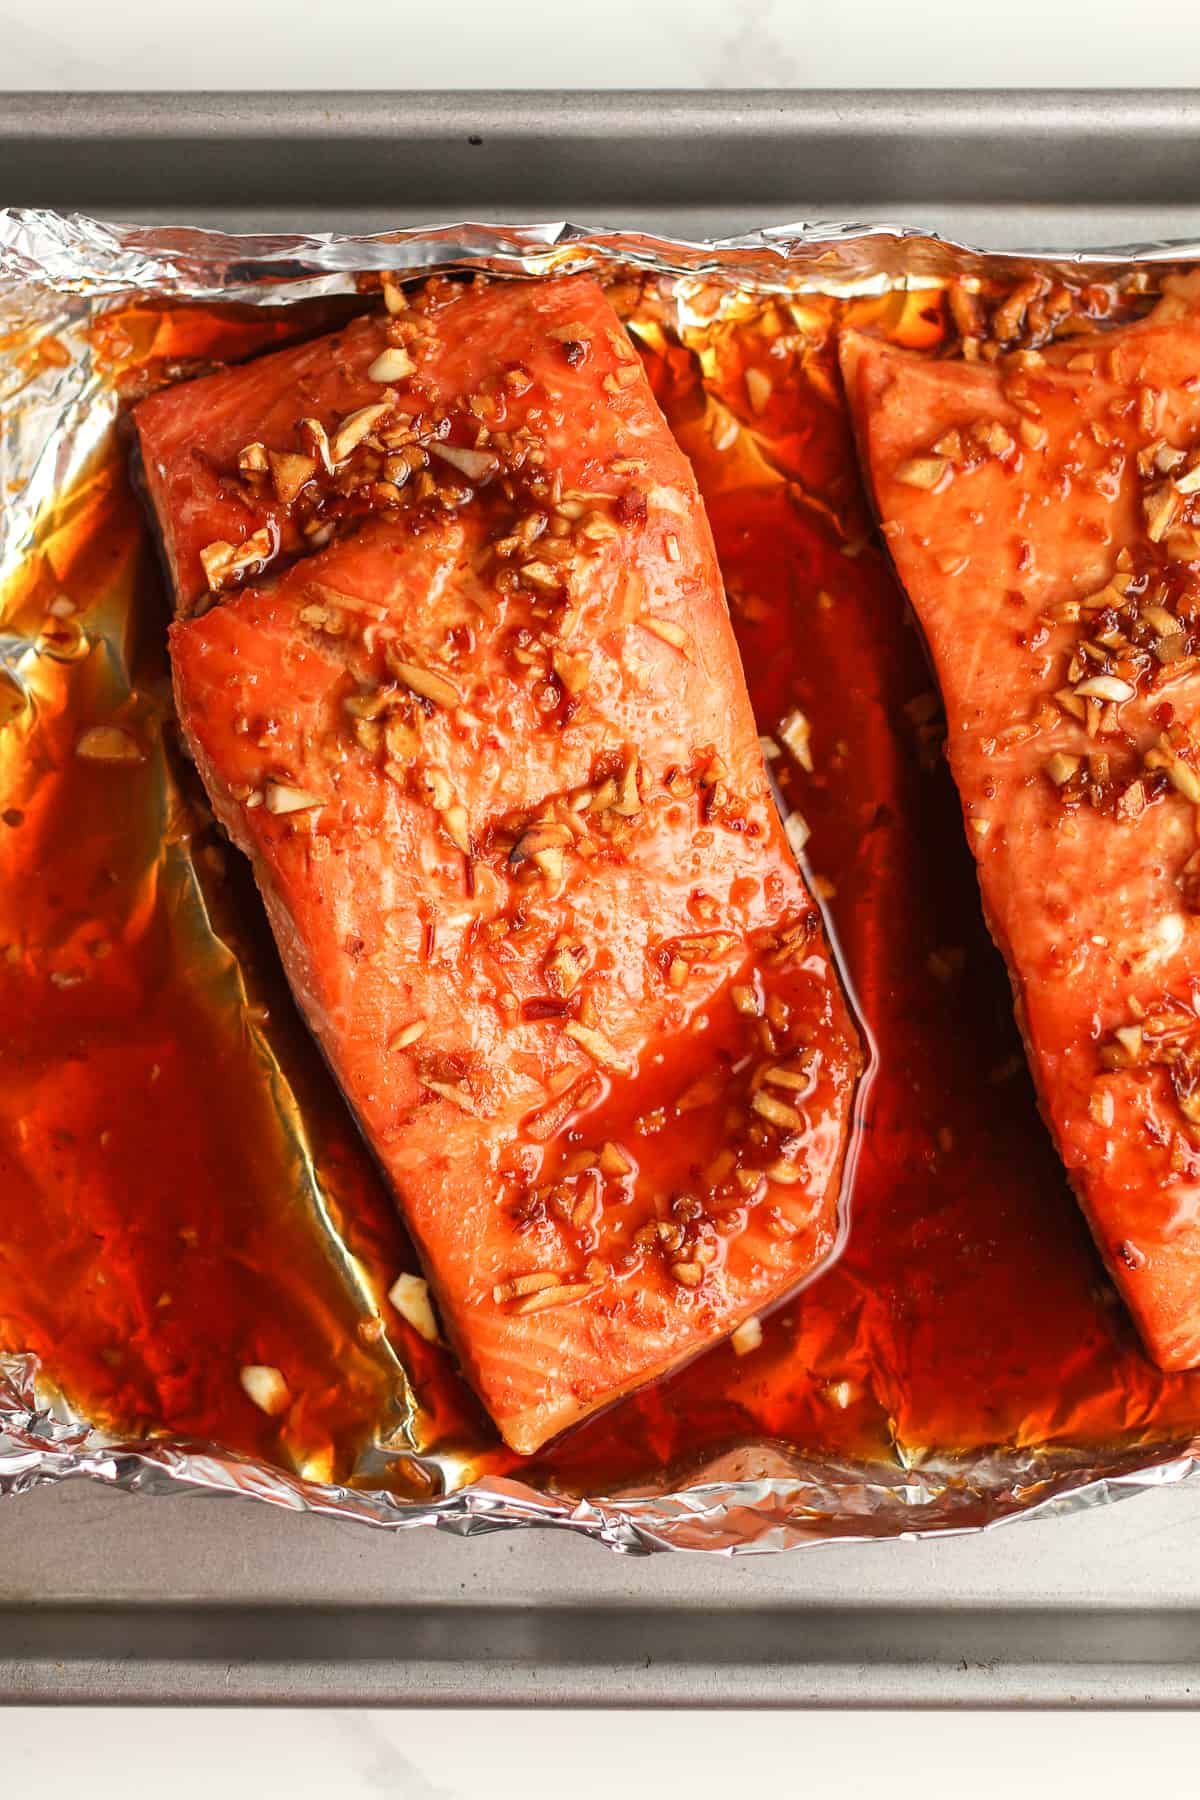 Overhead shot of a chunk of baked salmon with marinade.